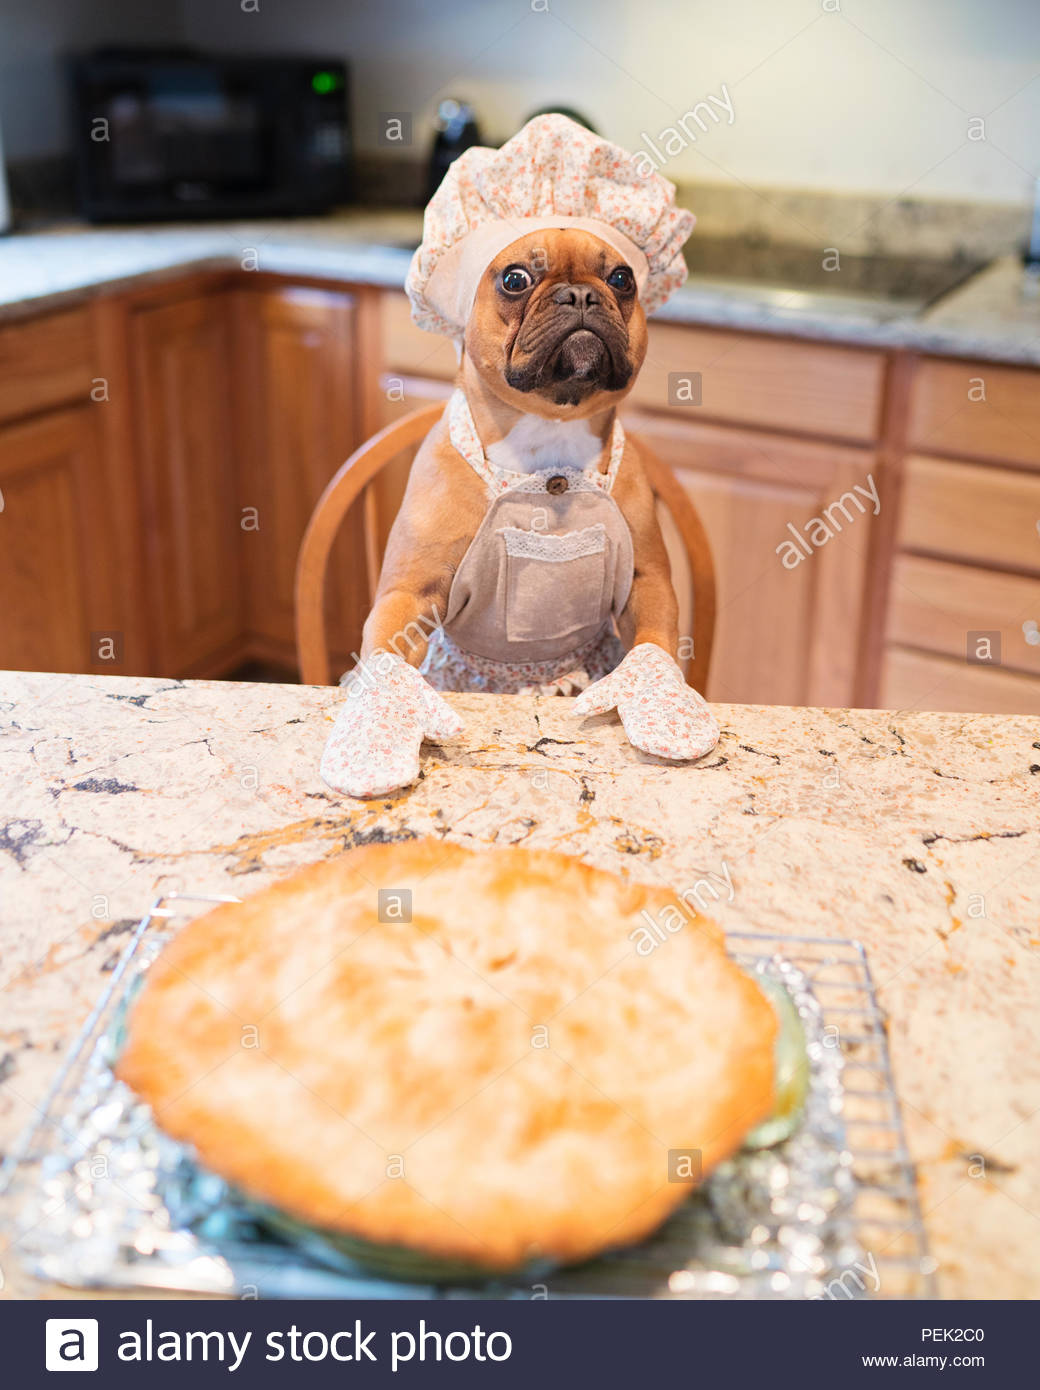 red-fawn-french-bulldog-wearing-bakers-hat-apron-and-oven-mitts-standing-at-the-kitchen-island-guarding-an-apple-pie-PEK2C0.jpg